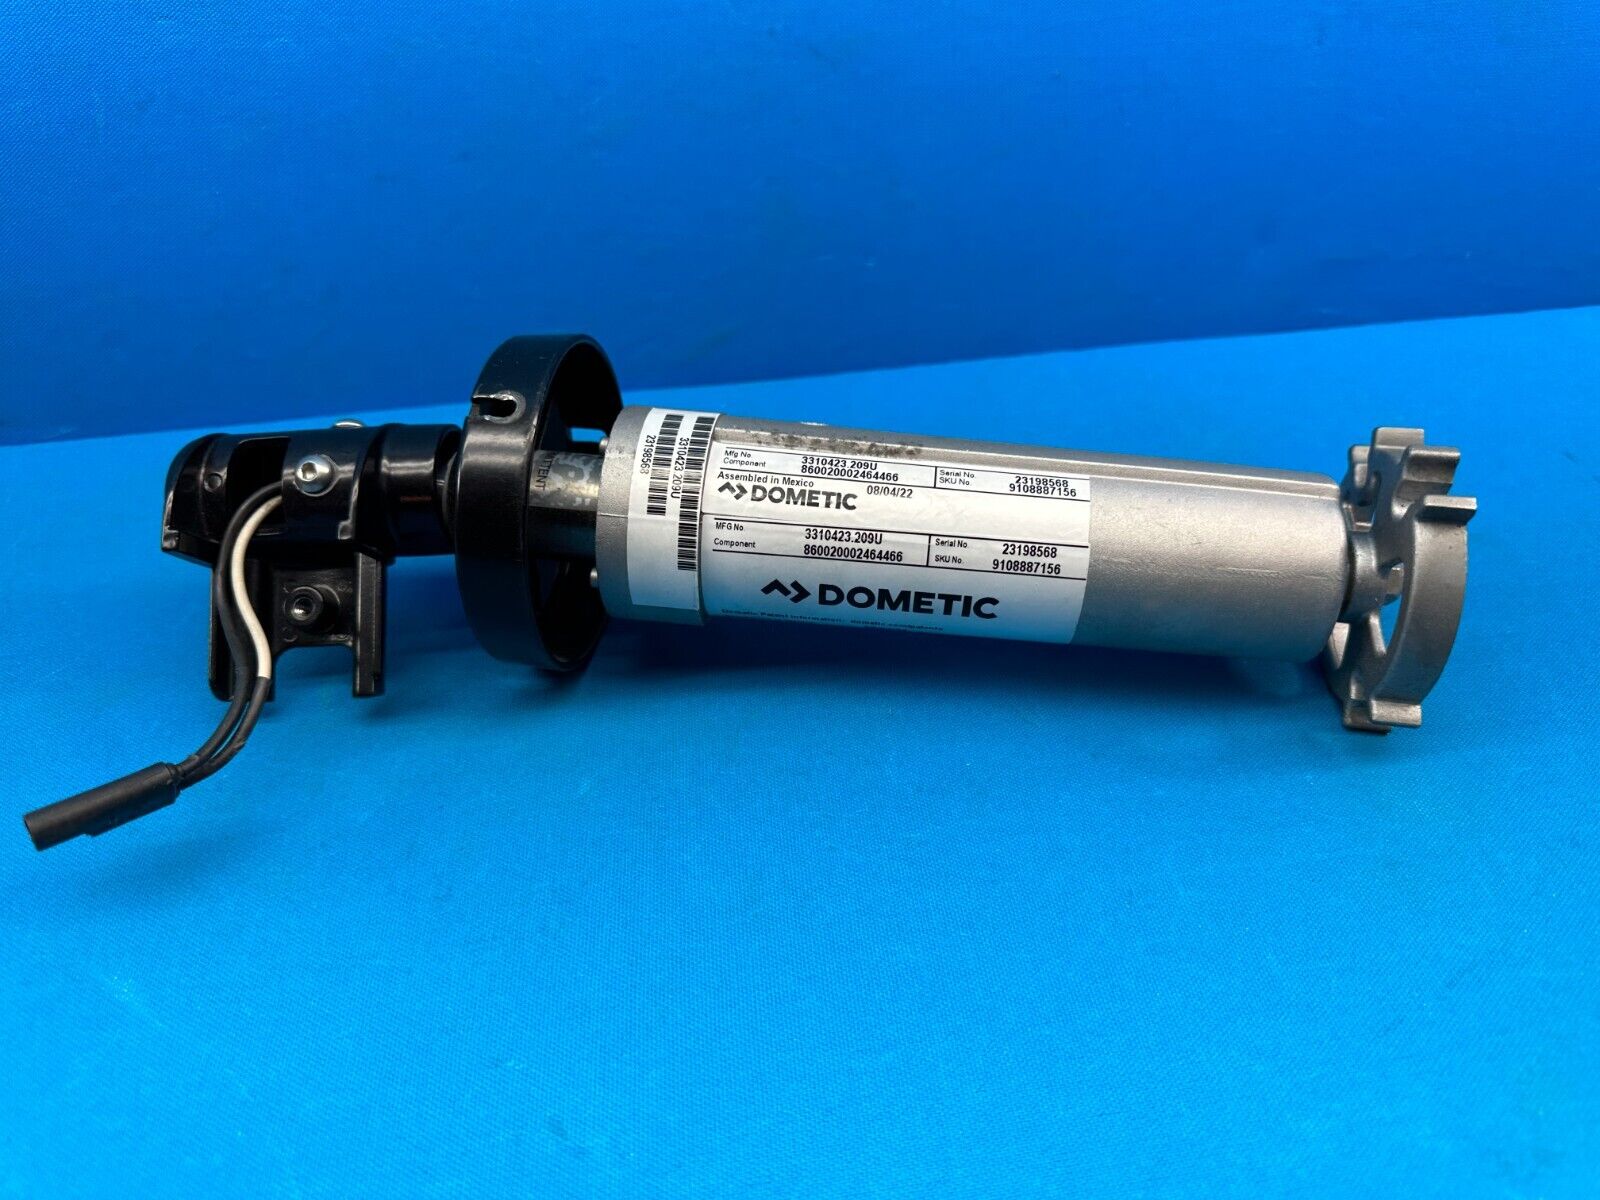 Have one to sell? Sell now Dometic Torsion Awning Extension Motor Assembly 3310423.209U For A&E Series 9100